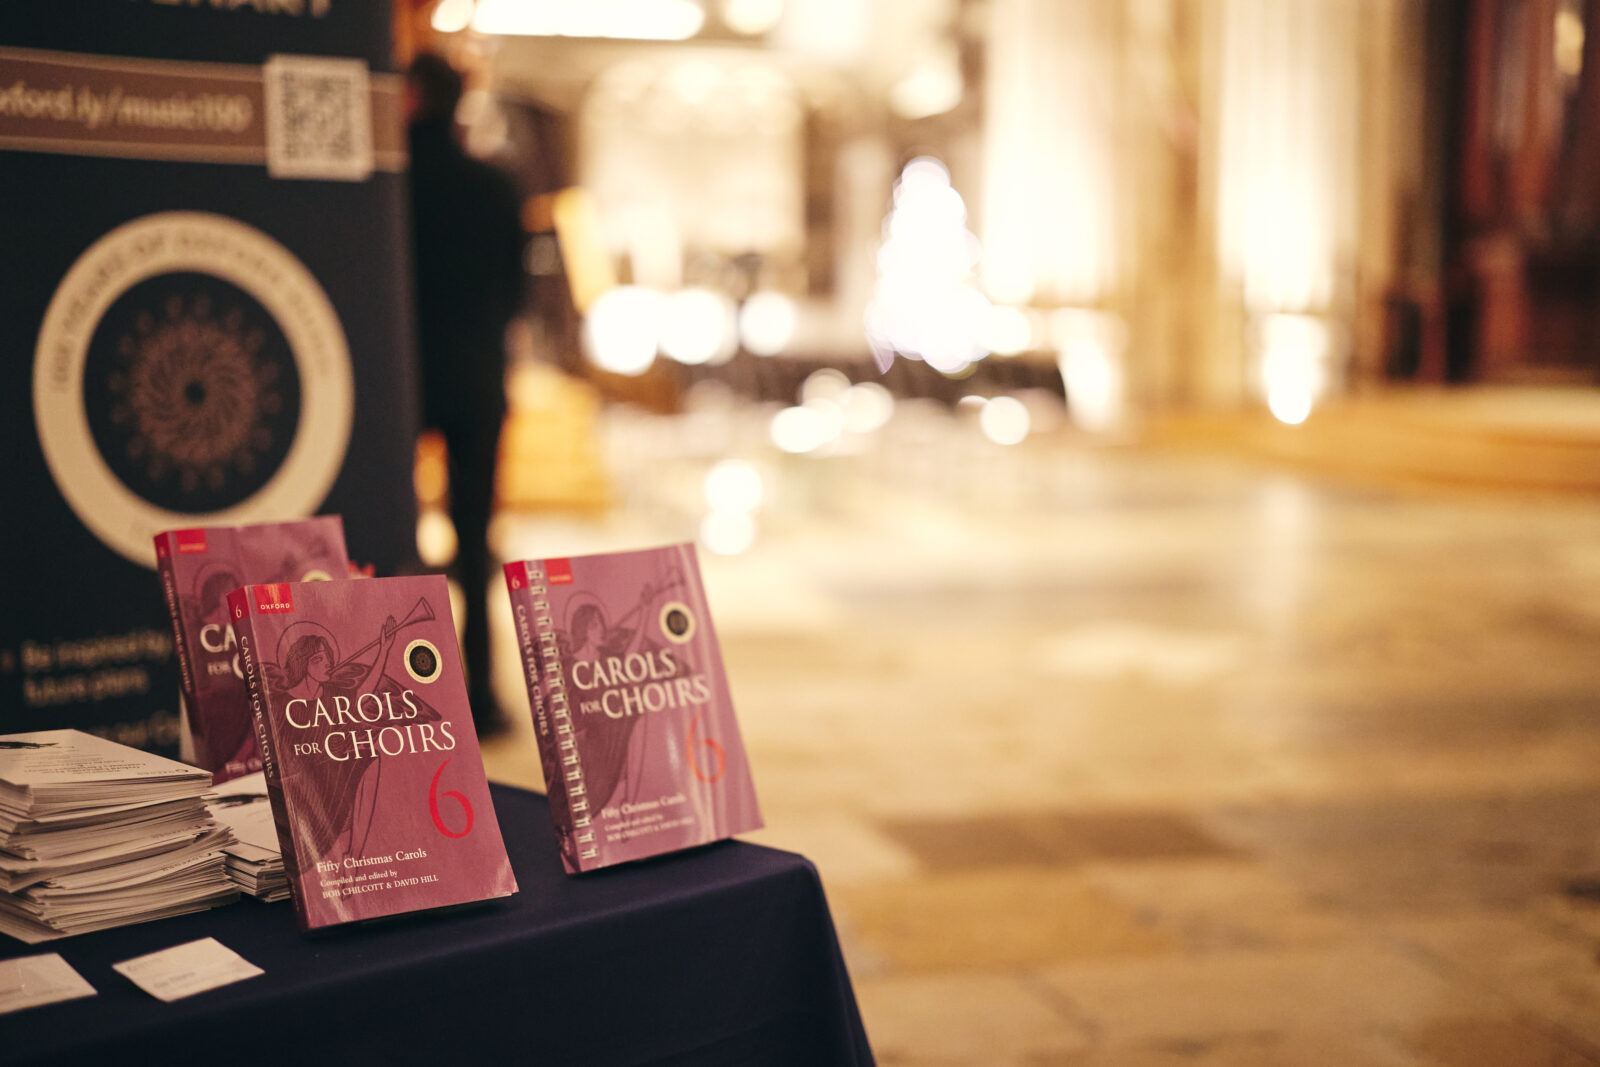 Copies of Carols for Choirs 6 at the 28 November launch event